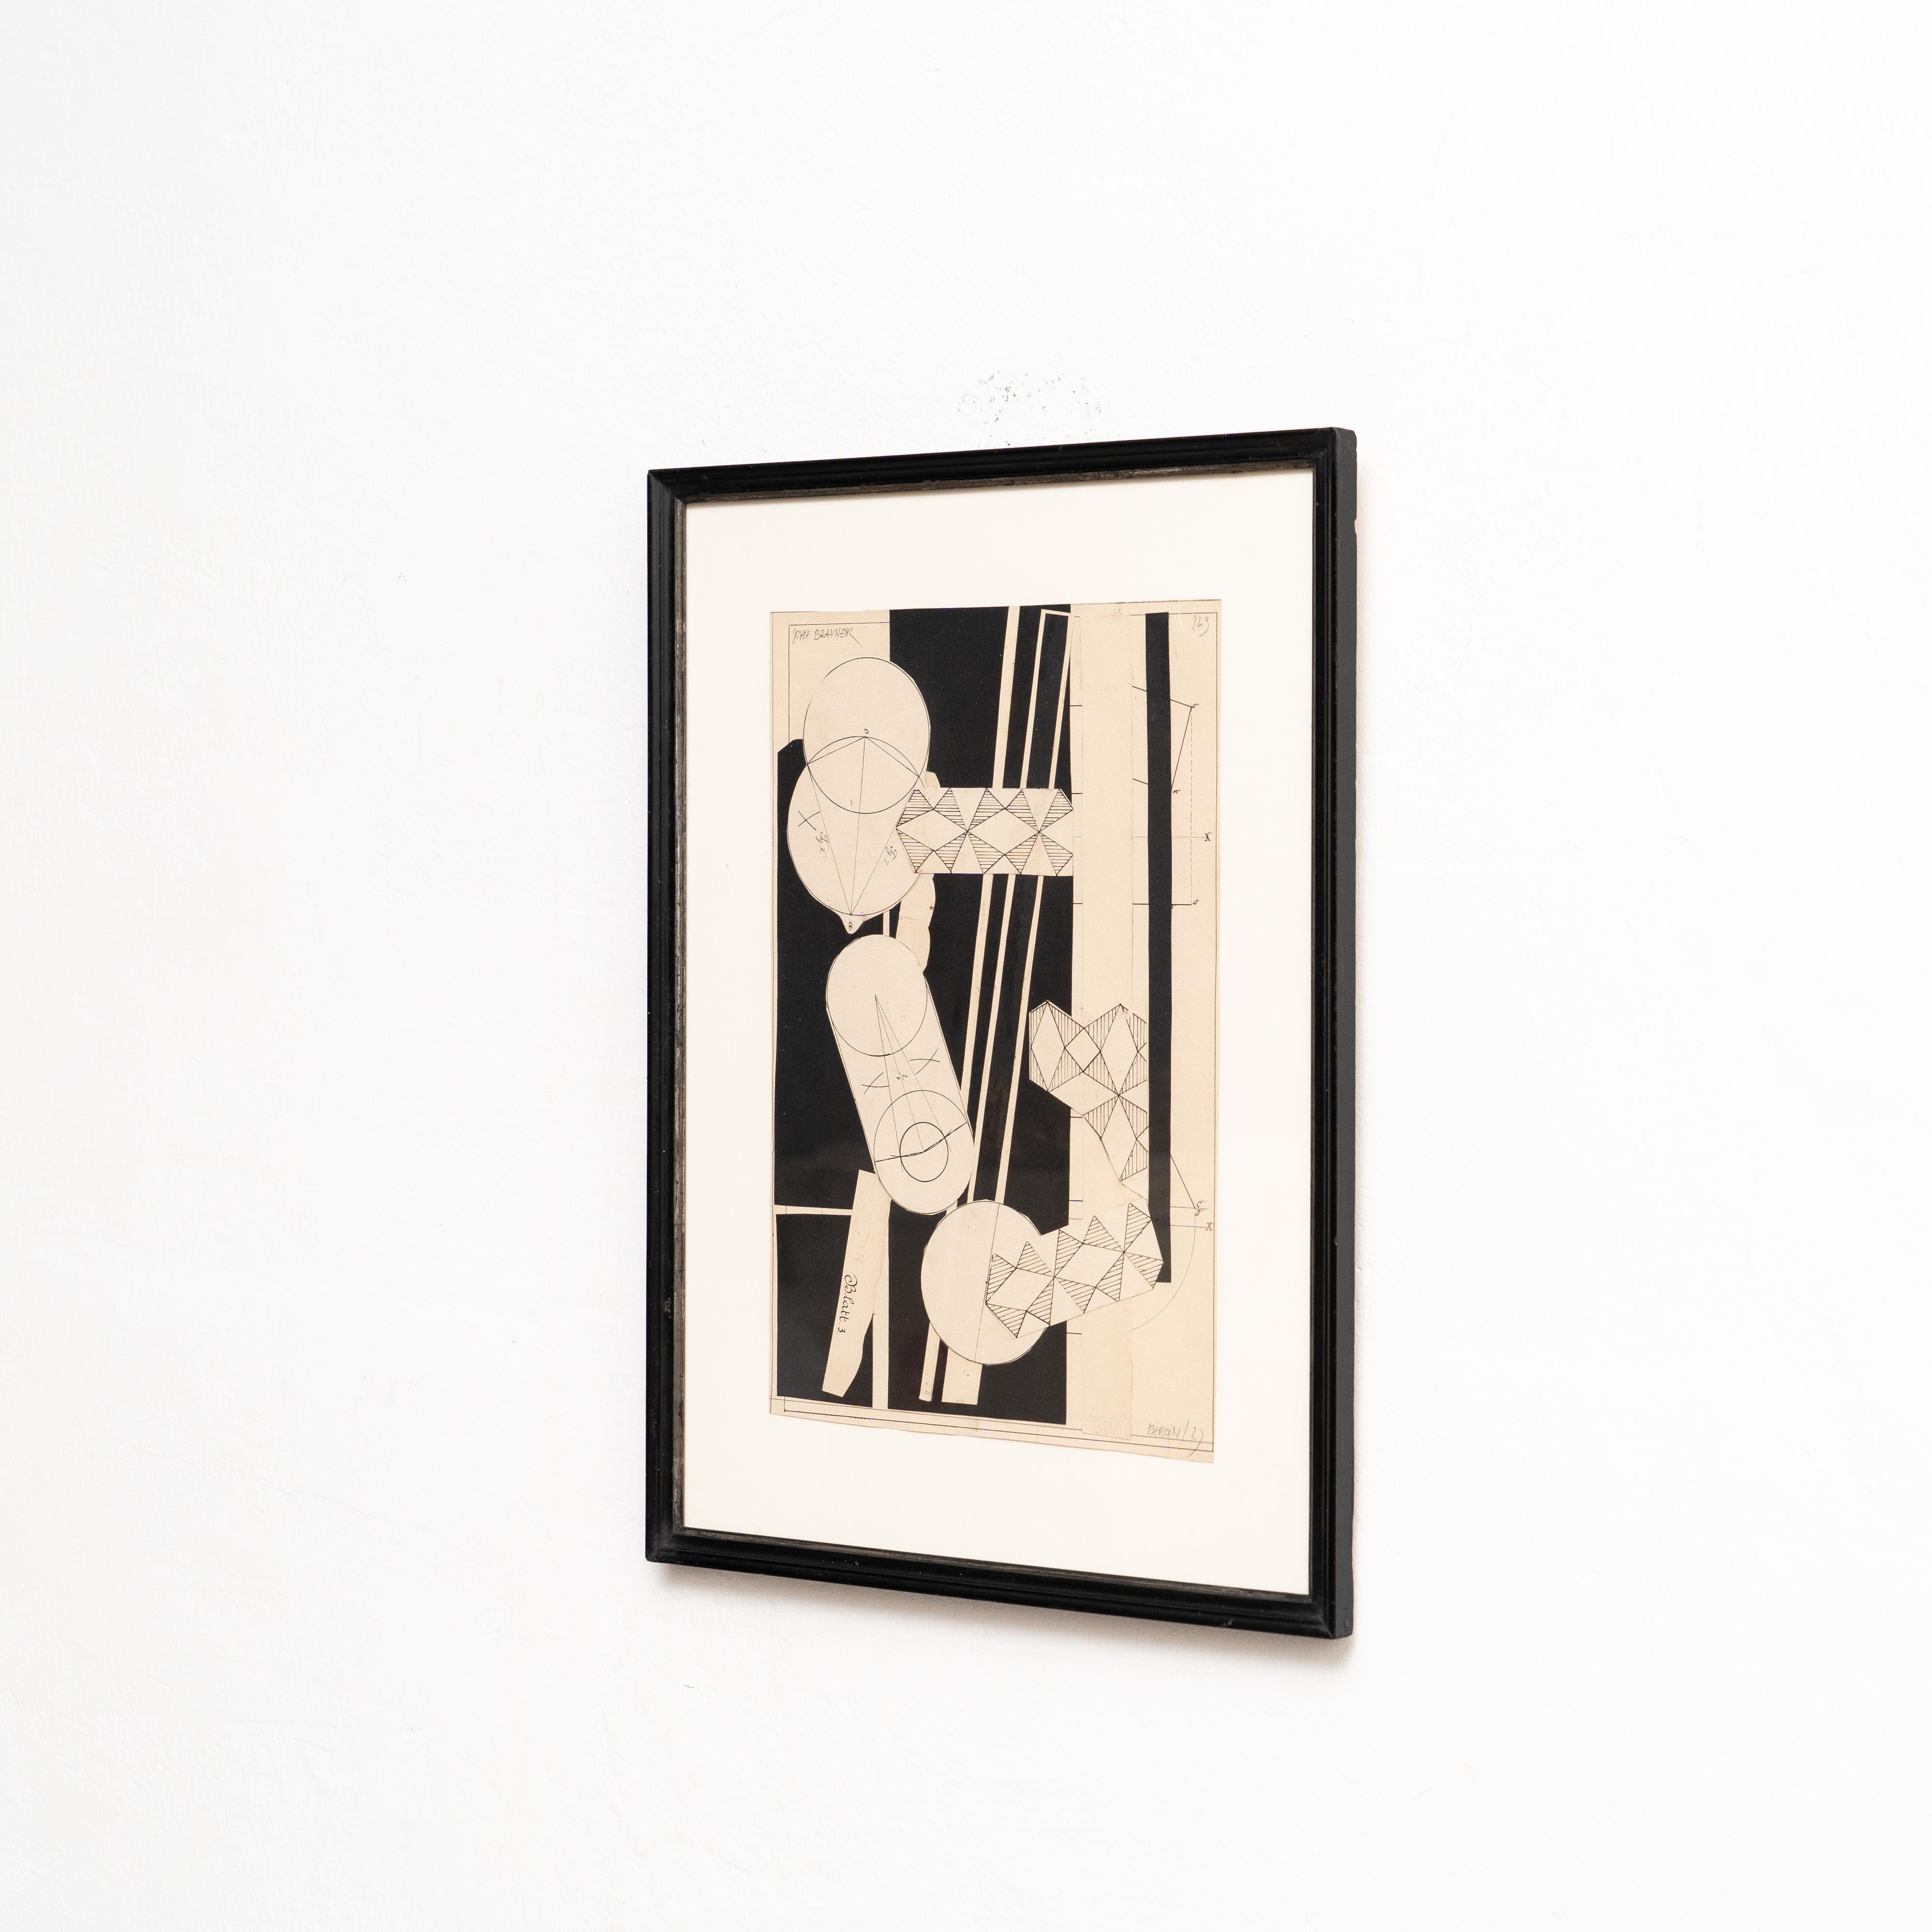 This captivating Bauhaus collage, created by Josef Brauner, showcases the artist's innovative approach to mixed media art. Crafted in Berlin, Germany, circa 1927, this artwork remains in its original condition, bearing minor wear consistent with its